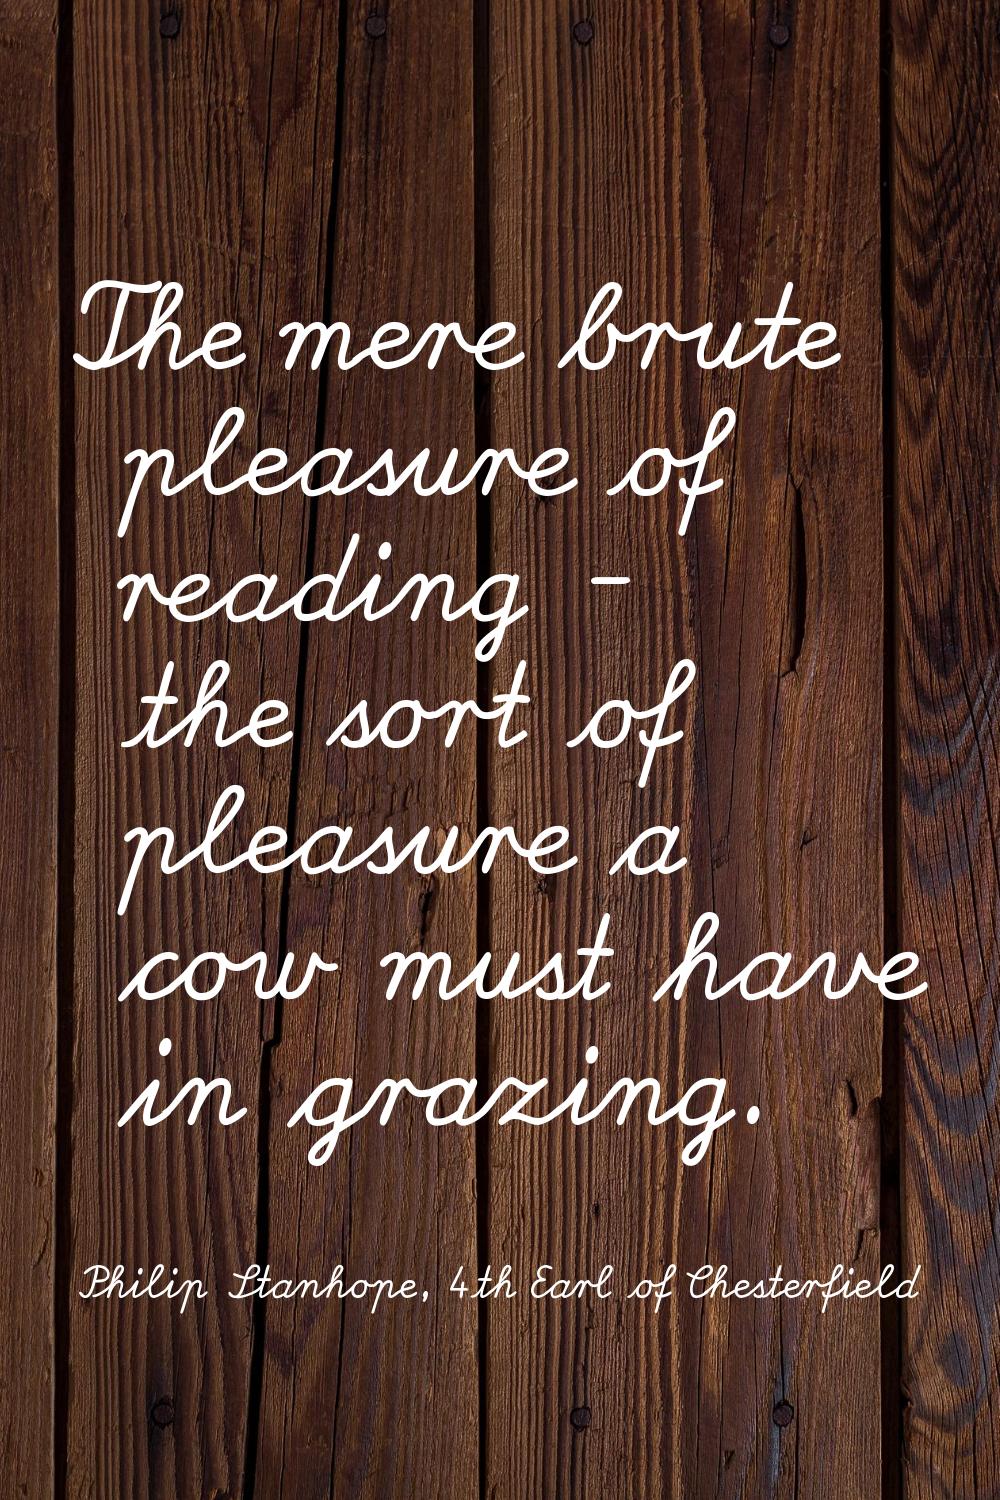 The mere brute pleasure of reading - the sort of pleasure a cow must have in grazing.